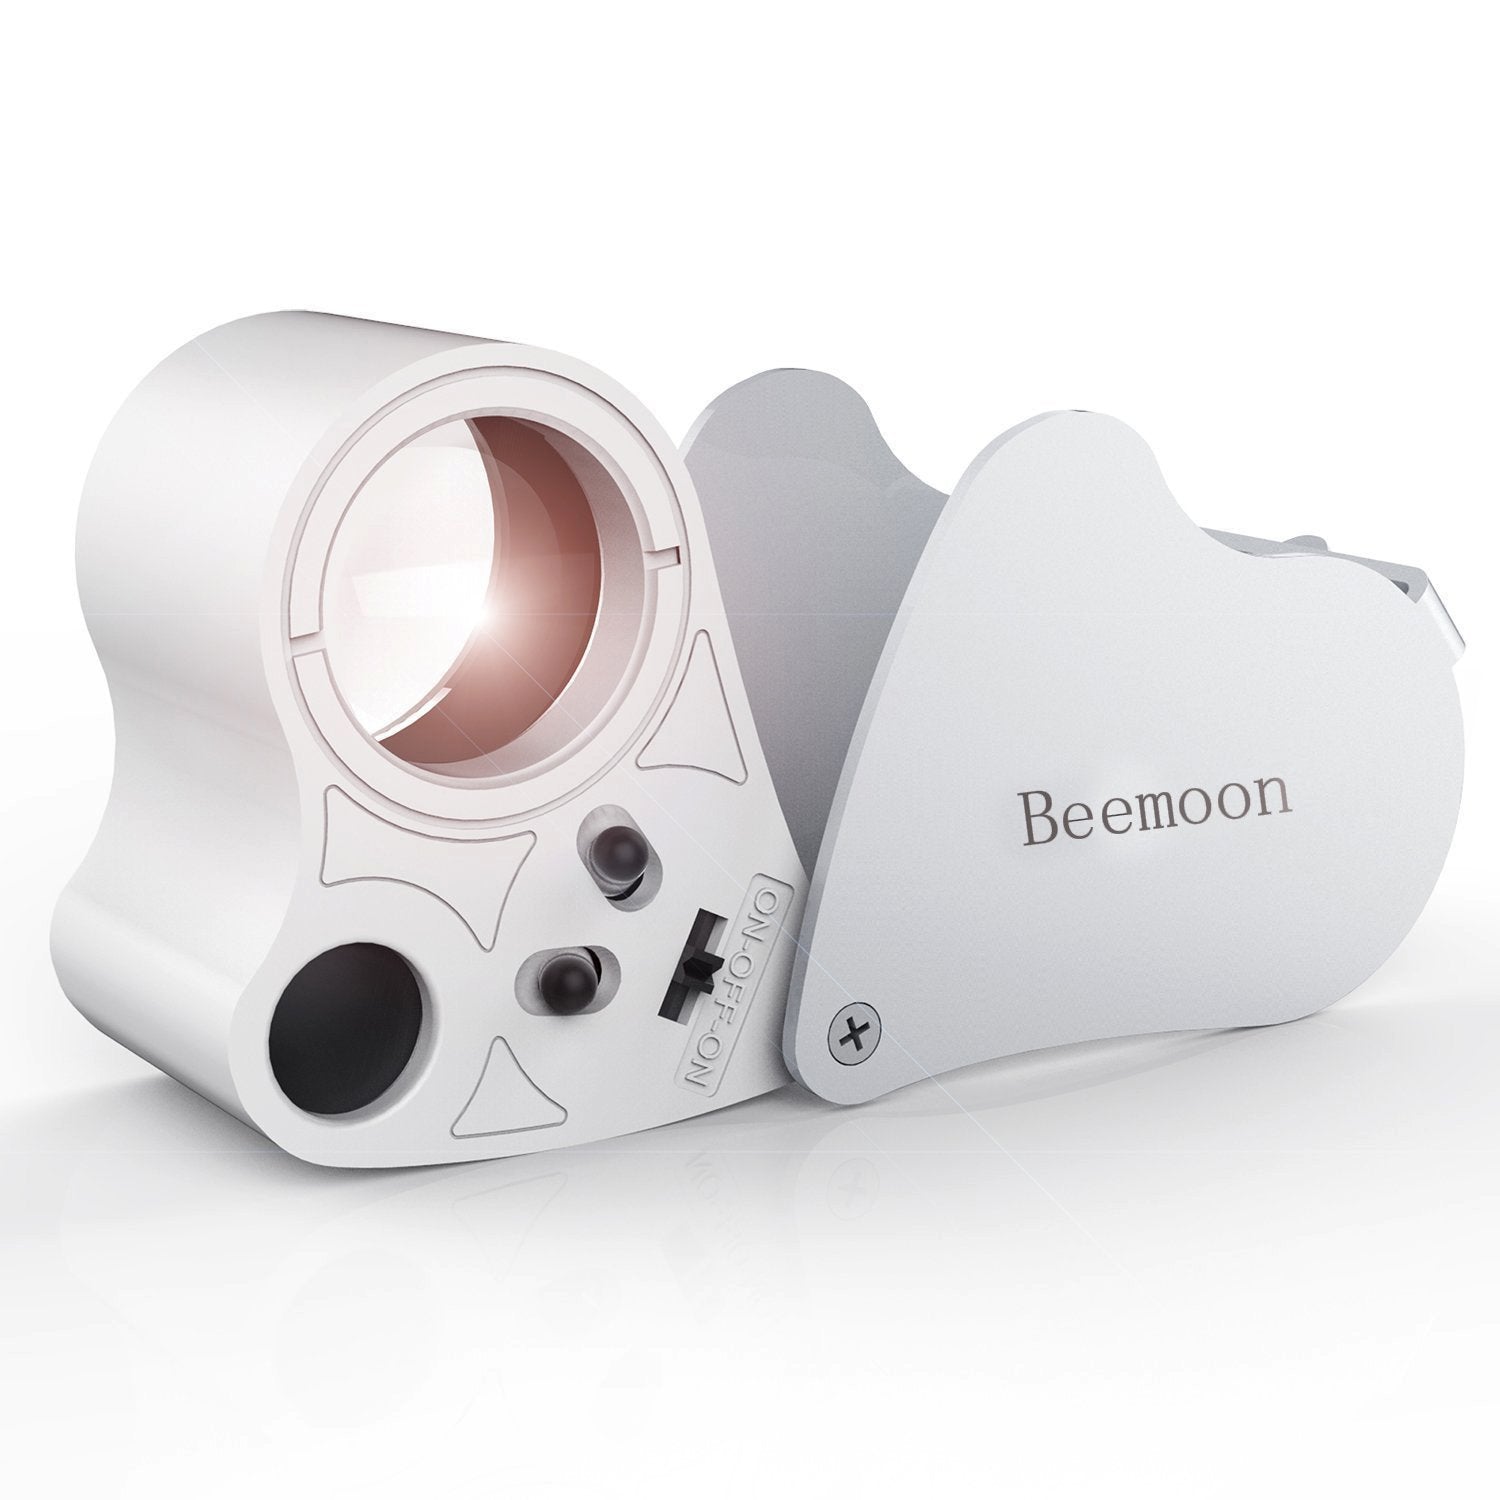 Beemoon Jewelry Magnifier, 30 X 60X Illuminated Jewelry Loupe for Gems Jewelry Rocks Stamps Coins Watches Antiques Models Photos